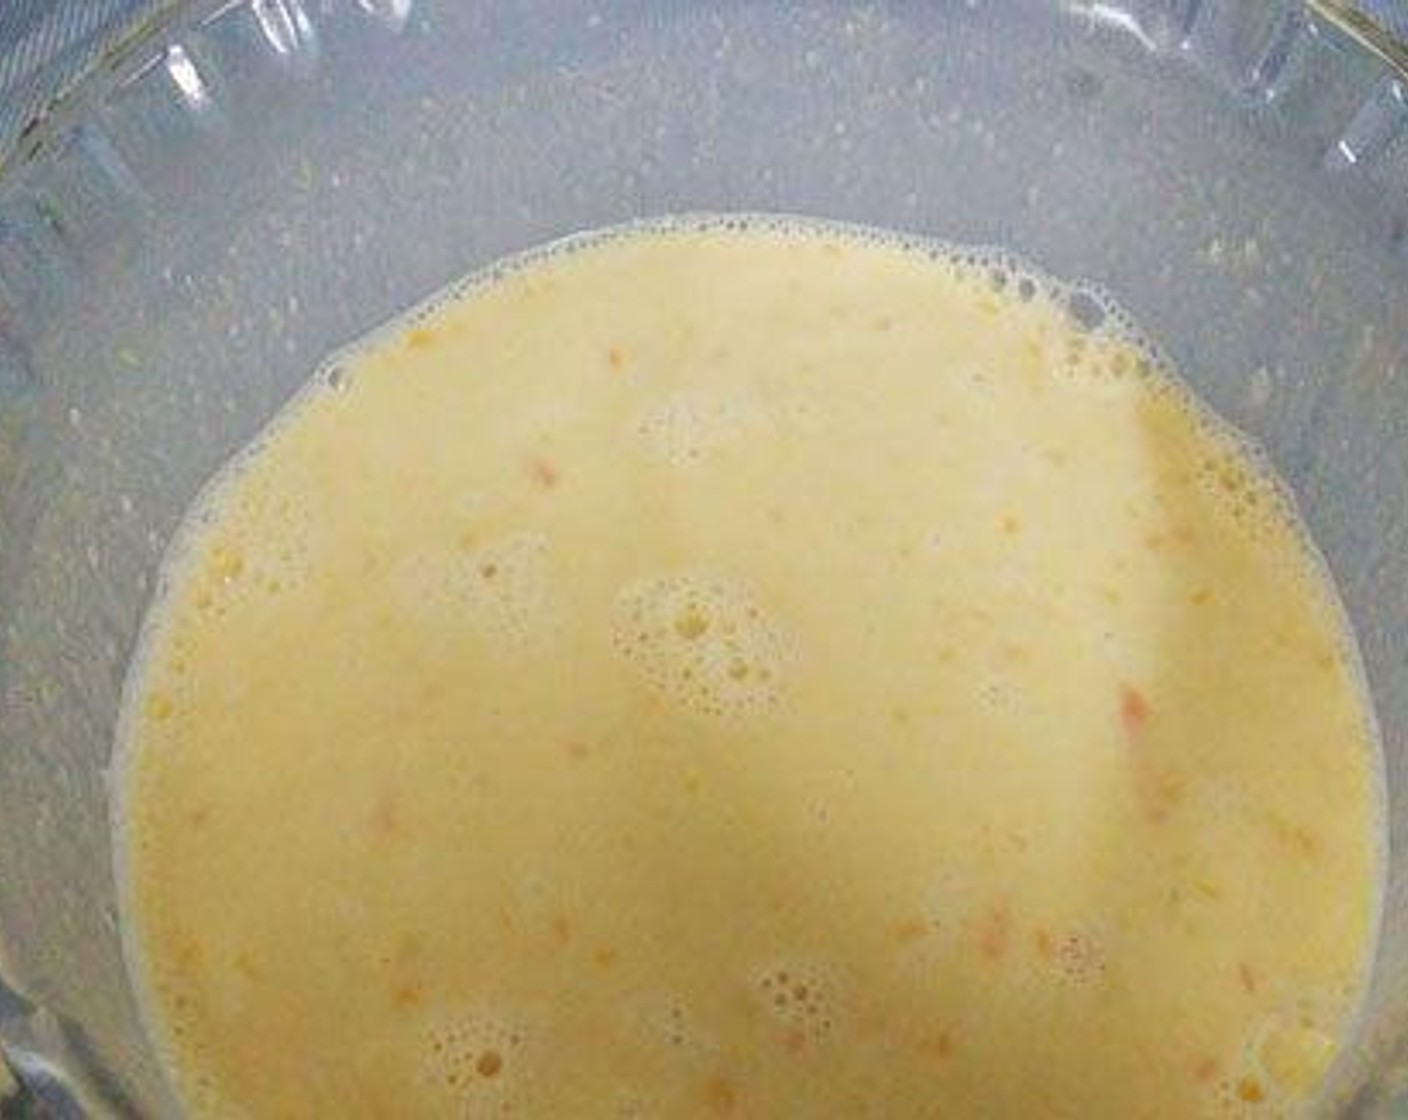 step 2 Boil the Whole Milk (3 cups) well and let it reduce. Once it cools a bit, add the carrot sweet corn paste, Sweetened Condensed Milk (1 cup) and Vanilla Essence (2 dashes). Mix well.